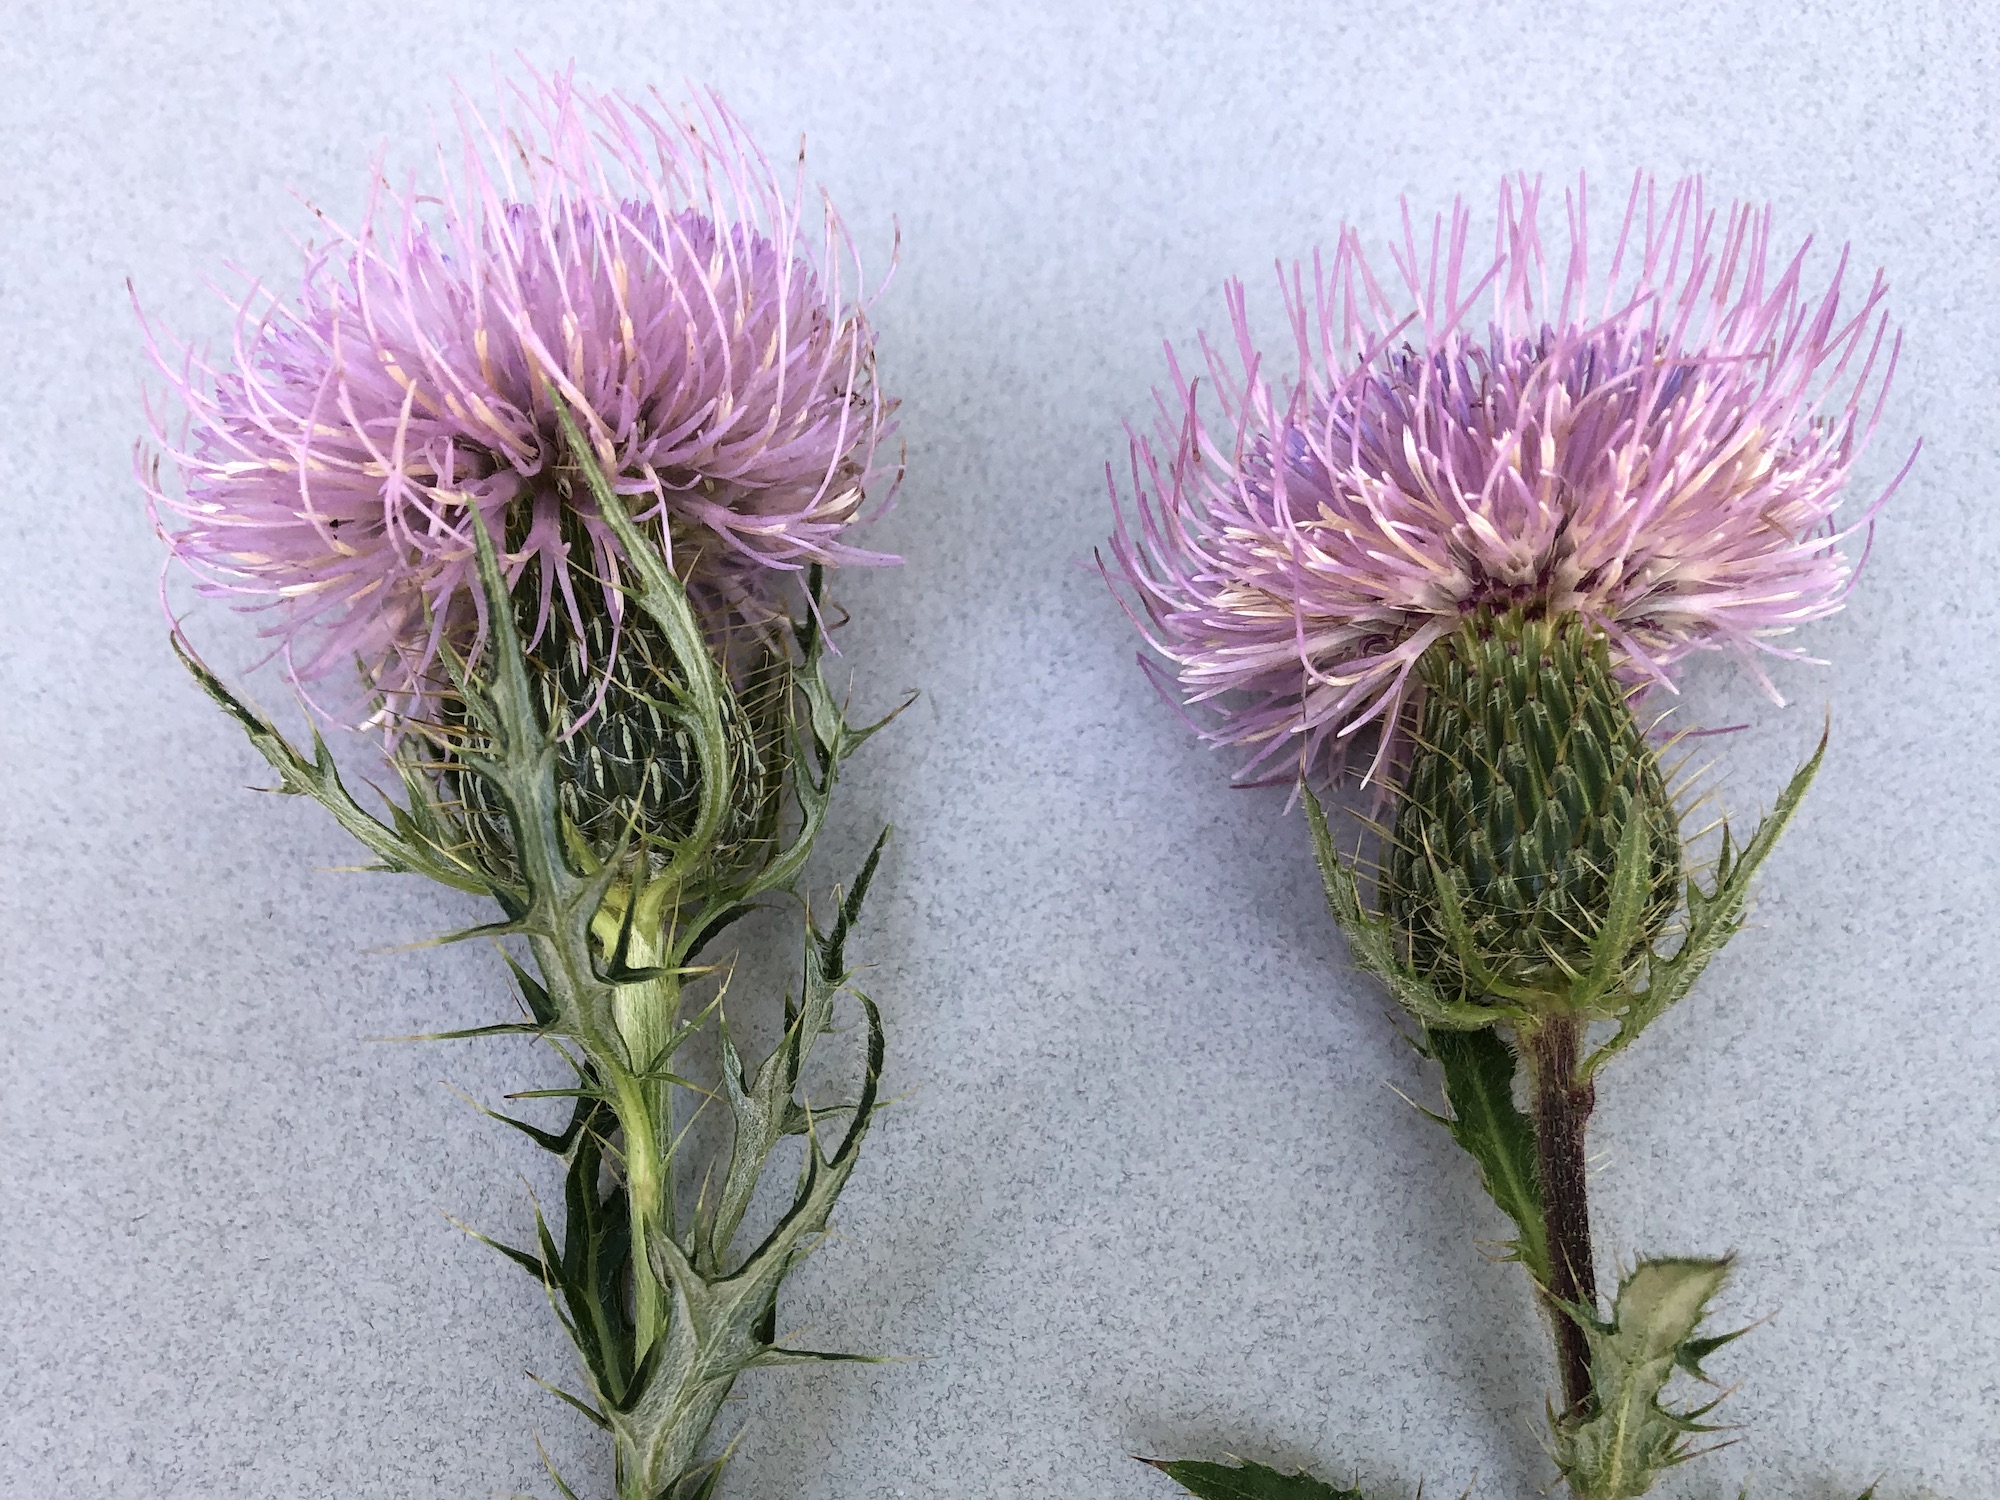 Field Thistle flower on left and Tall Thistleflower on the right.  Photo taken on August 30, 2022.